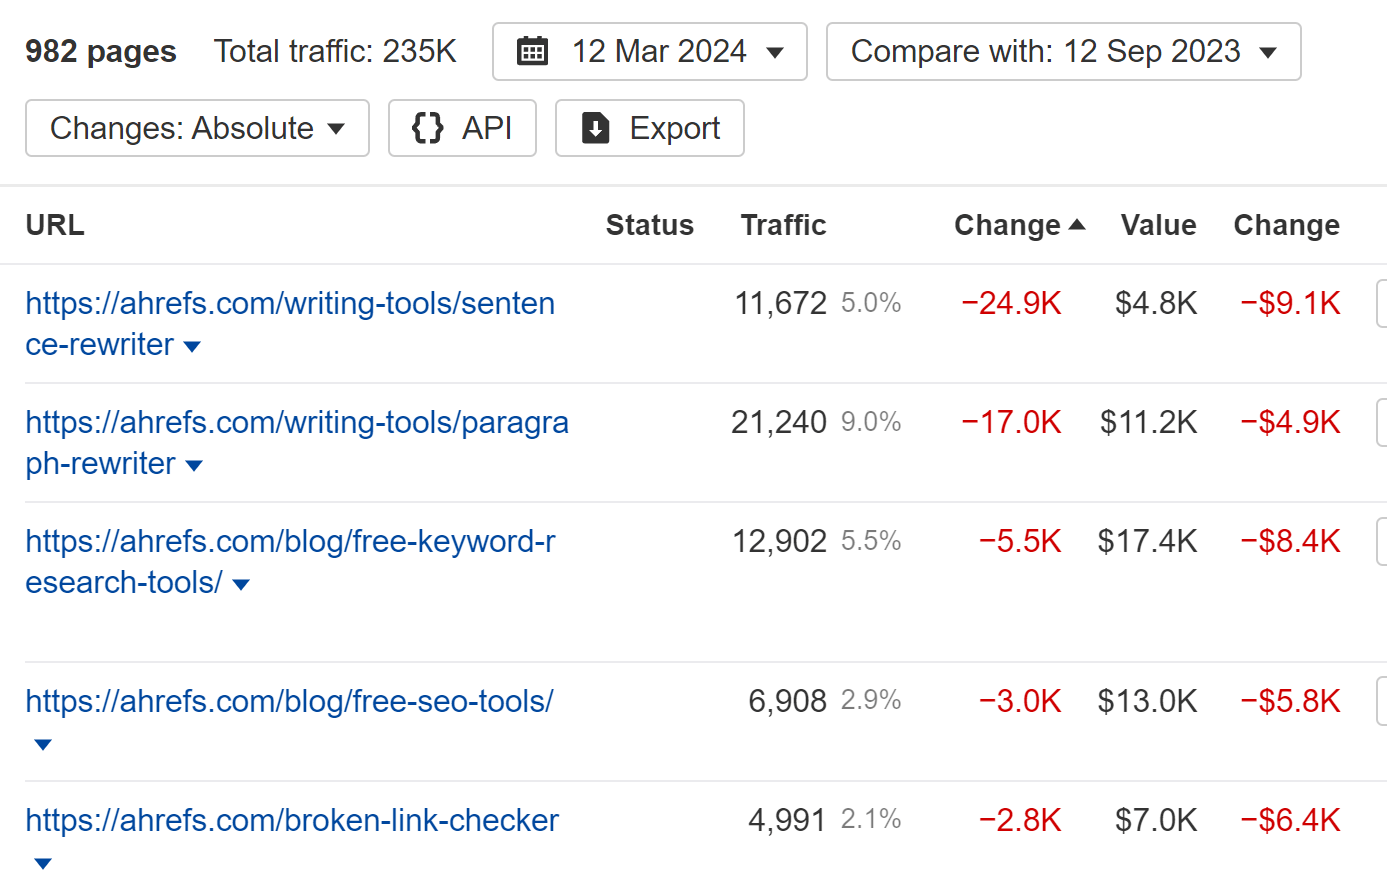 Filter showing content with declining traffic that you may want to improve